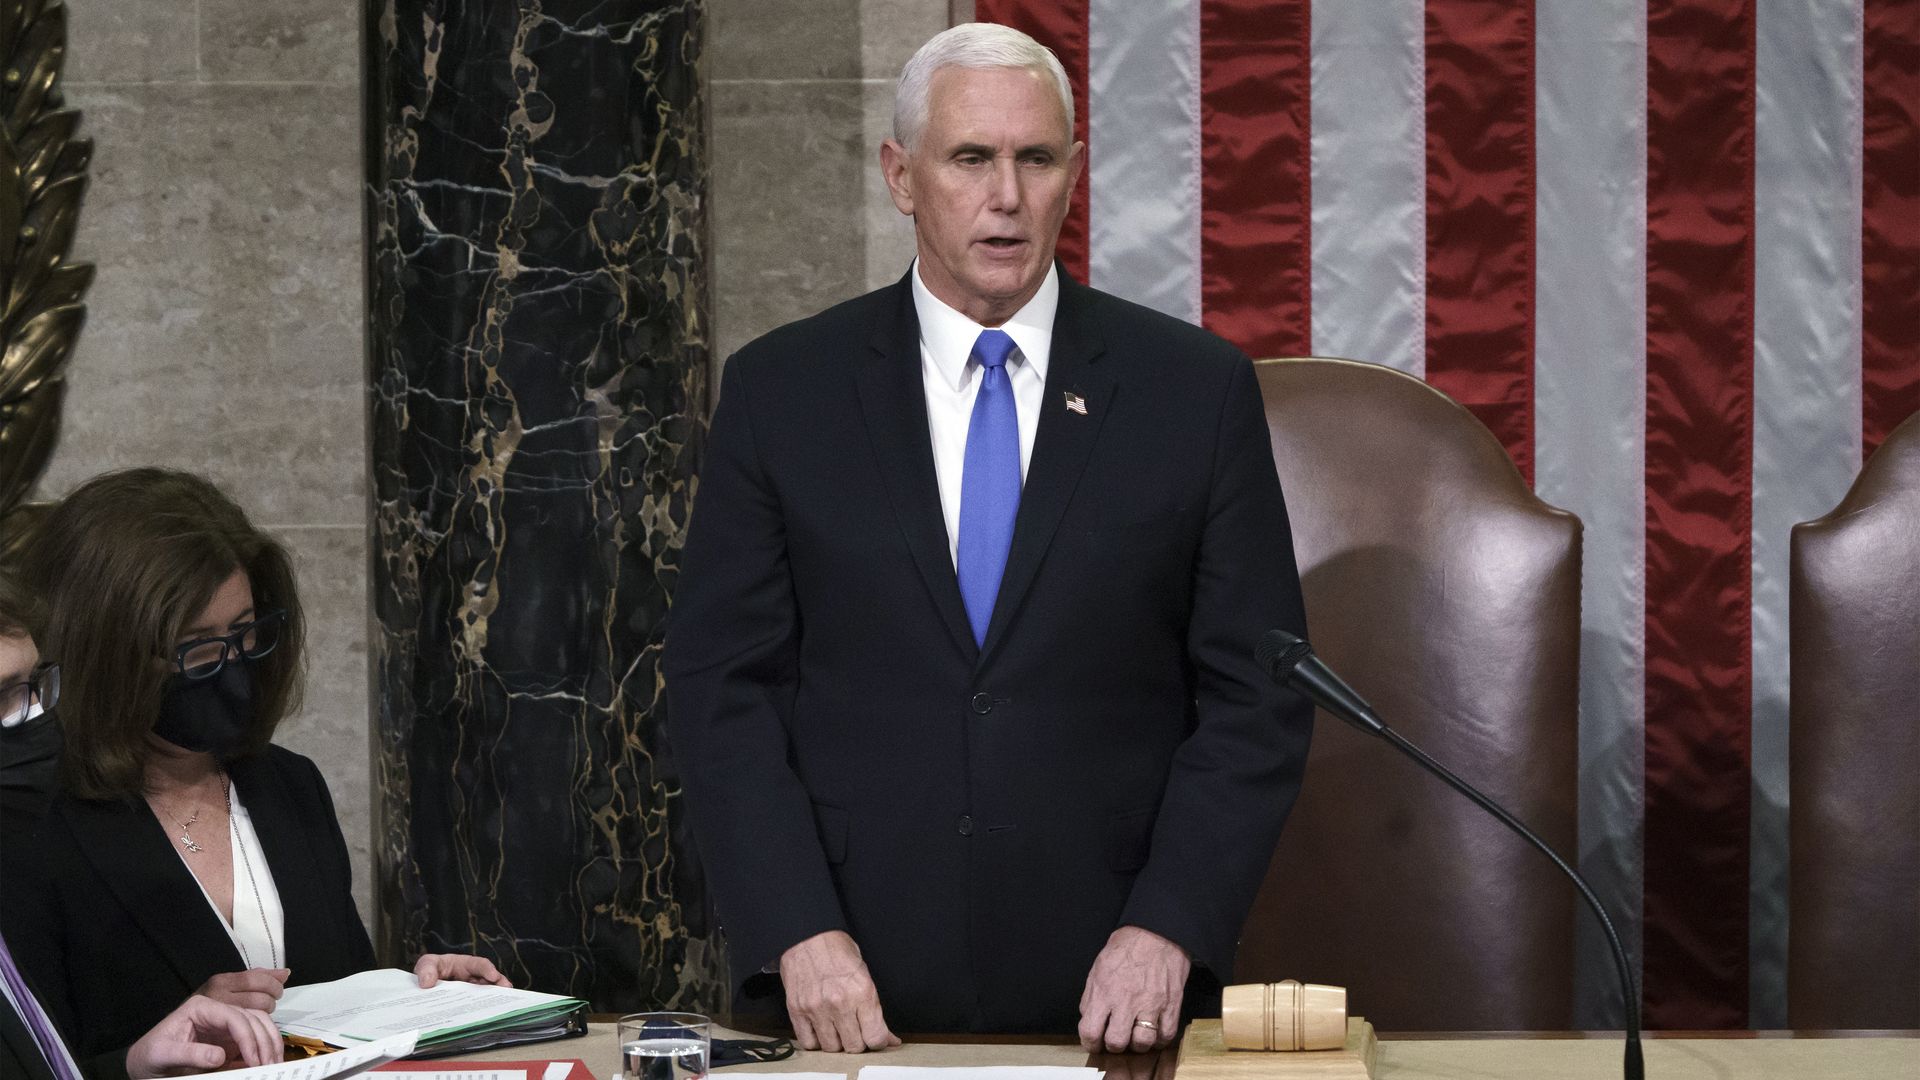  Vice President Mike Pence reads the final certification of Electoral College votes cast in November's presidential election during a joint session of Congress